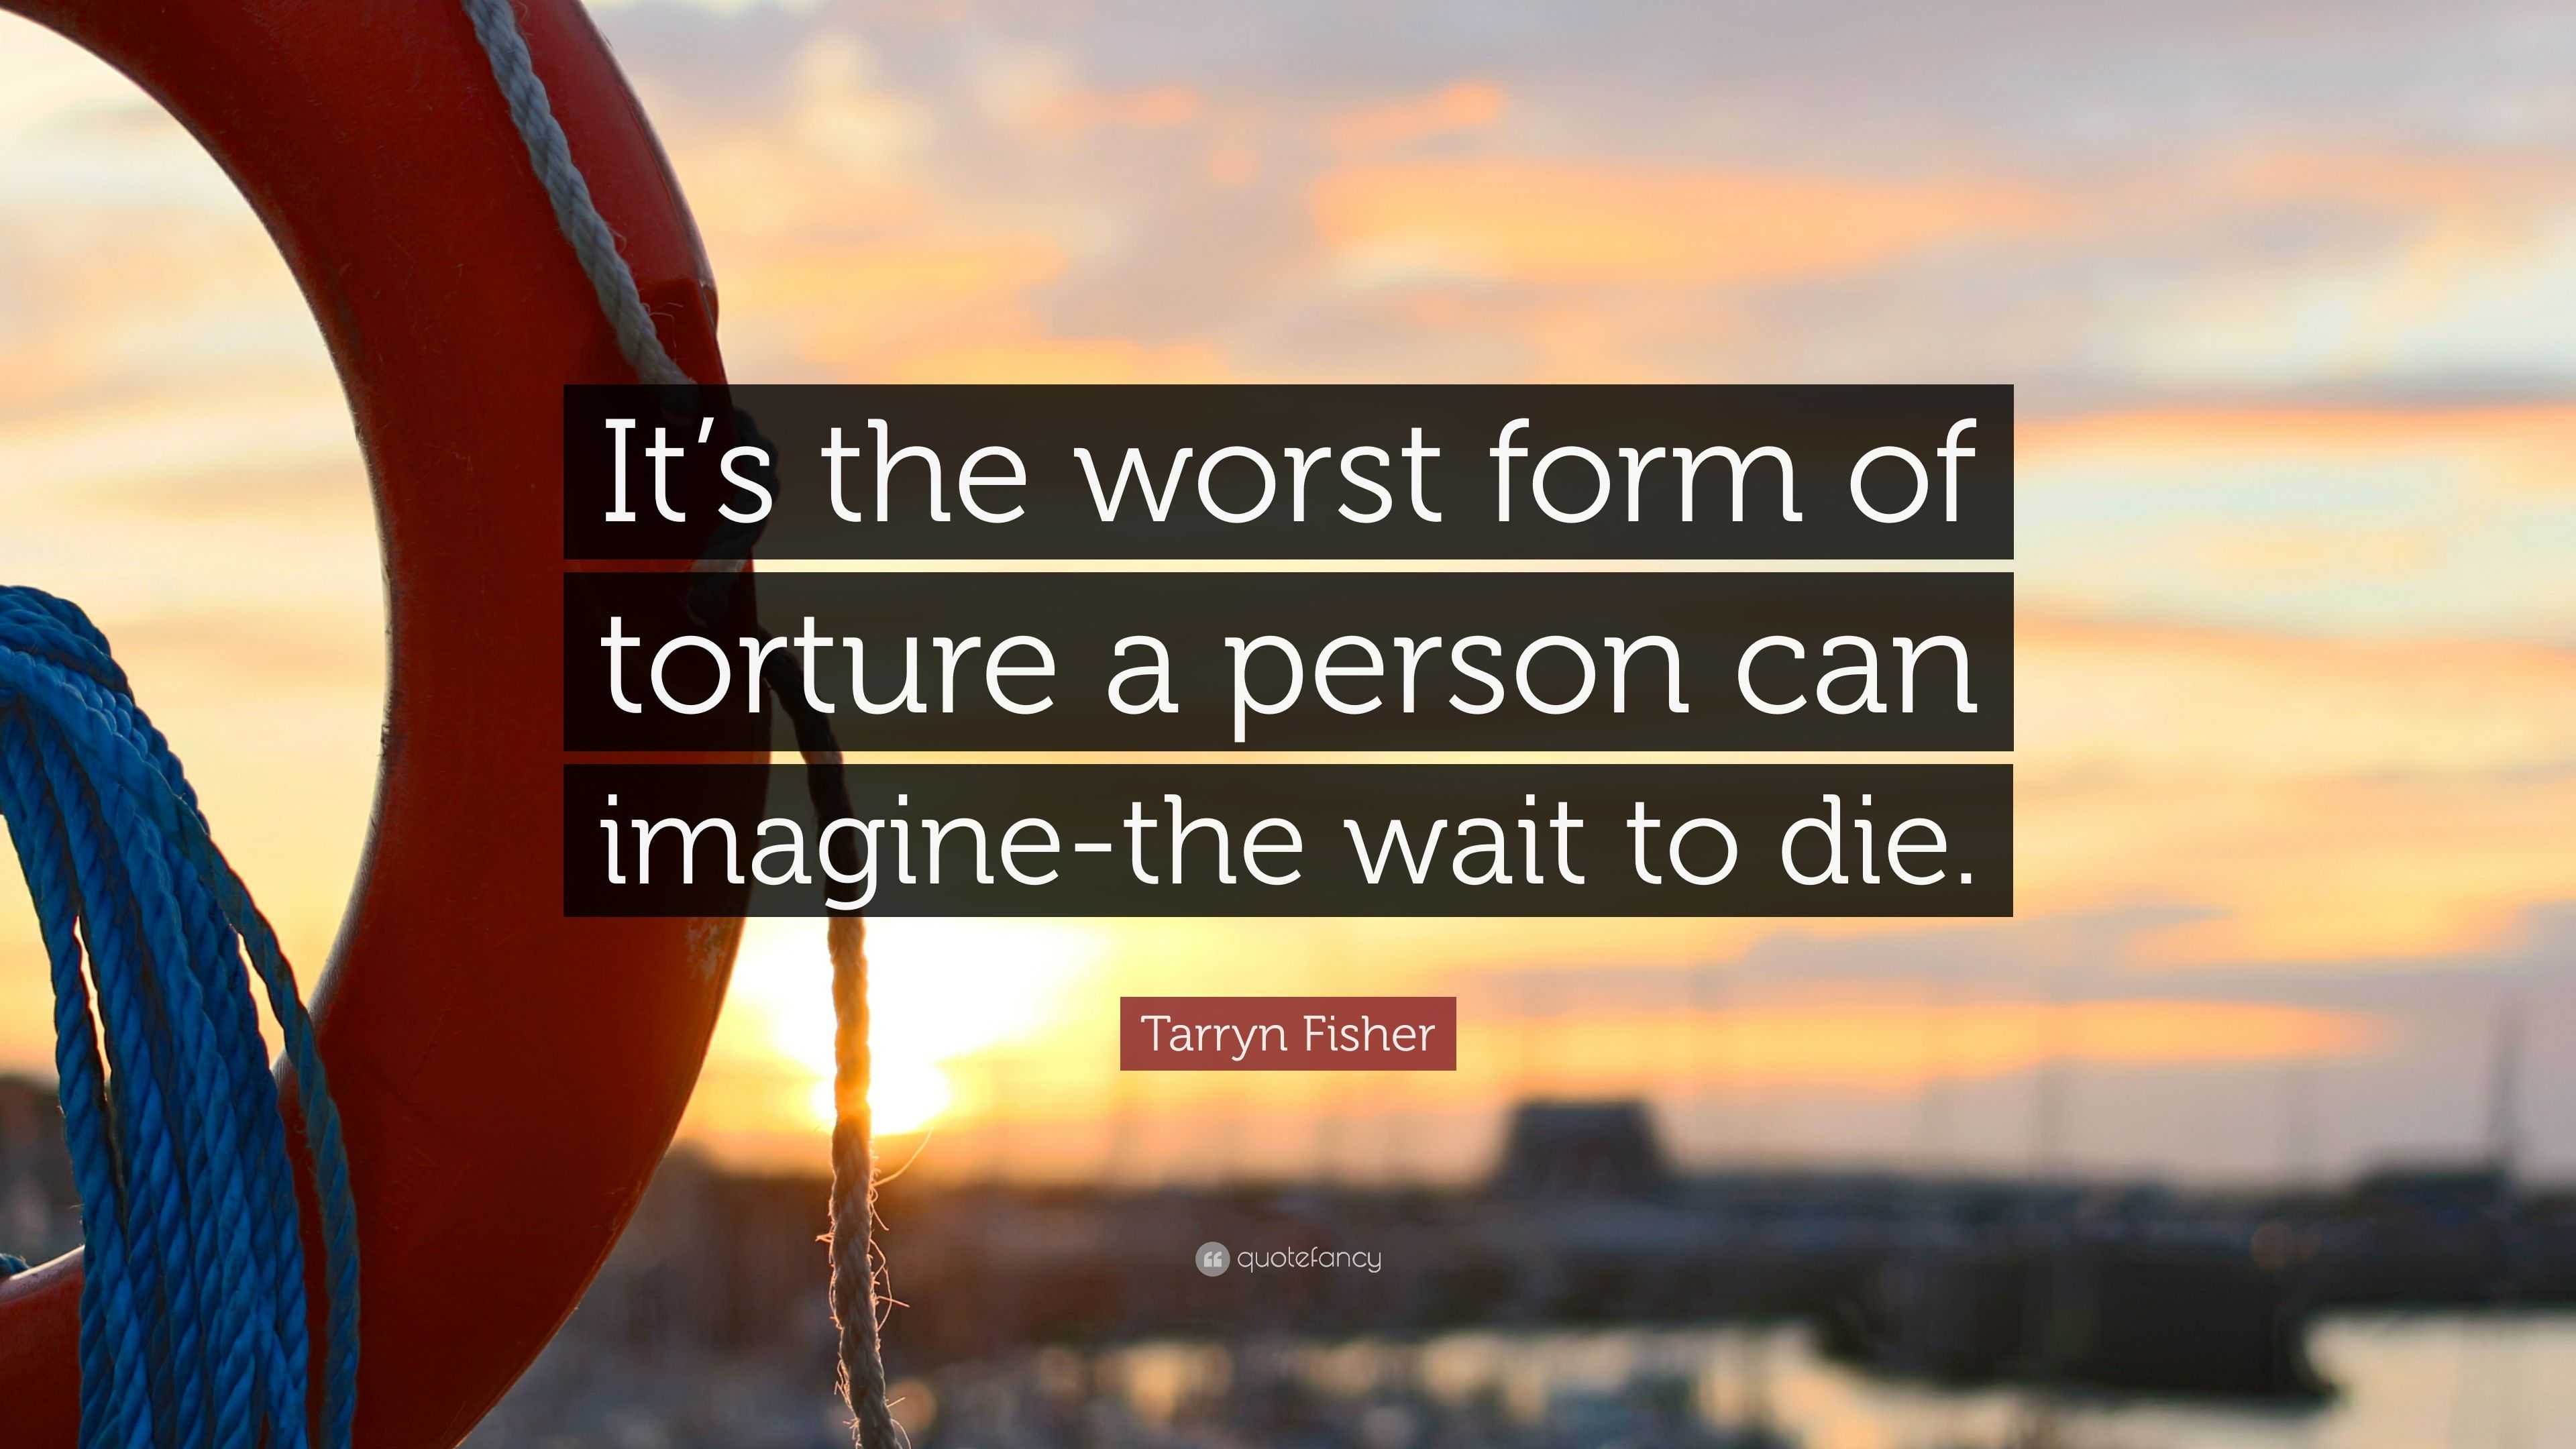 tarryn-fisher-quote-it-s-the-worst-form-of-torture-a-person-can